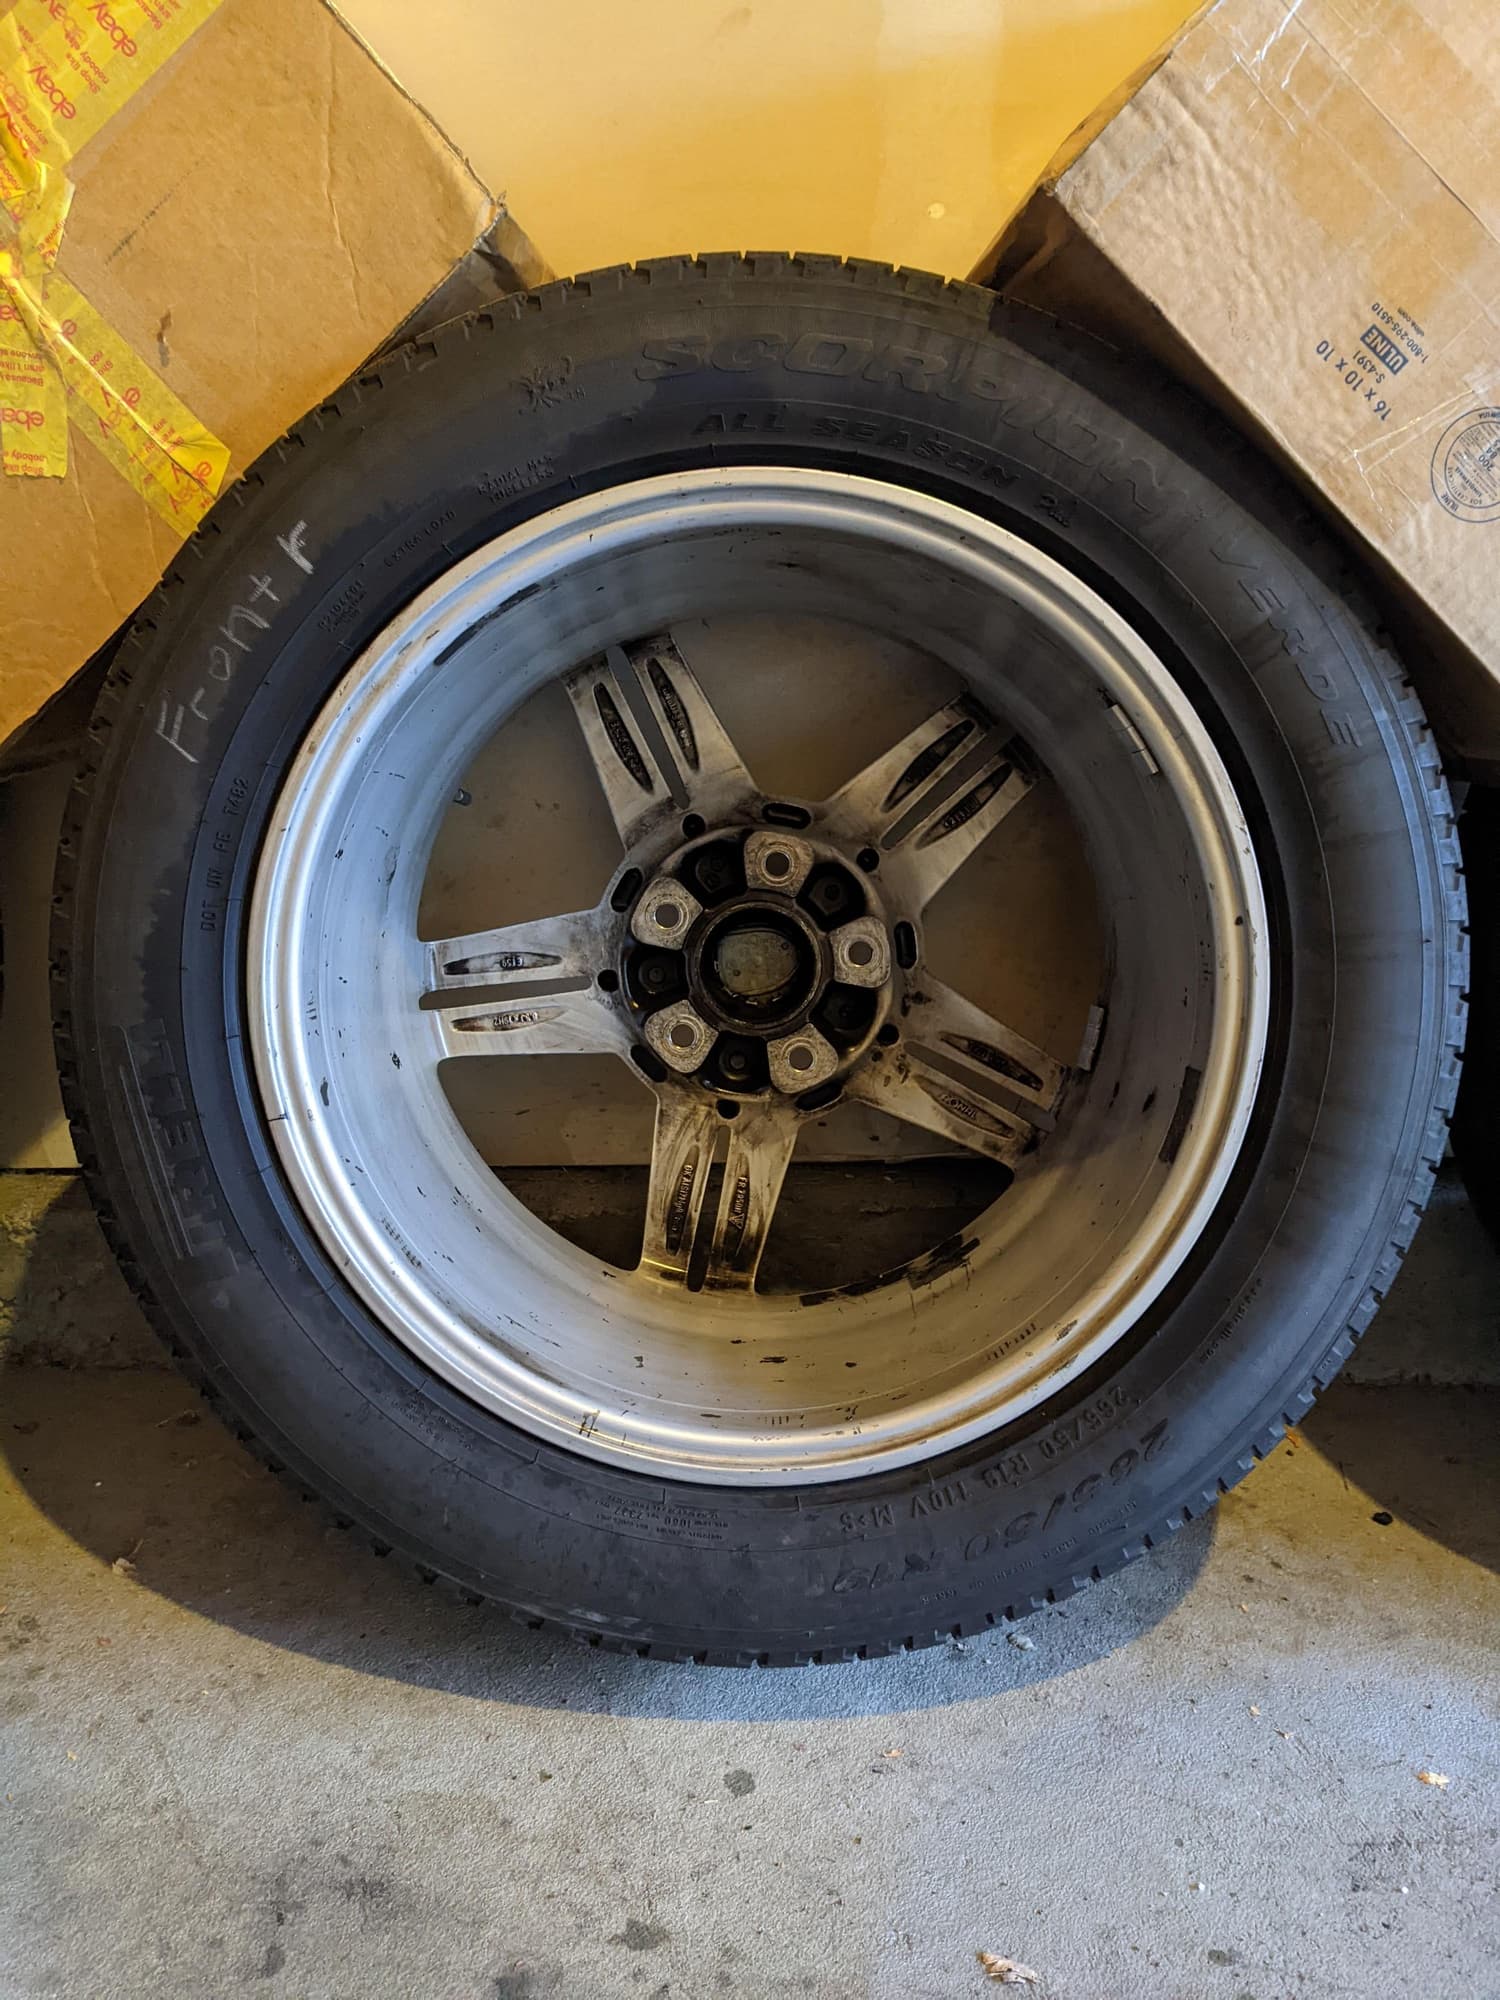 Wheels and Tires/Axles - Set of 4 19" Cayenne Design II Wheel+Tires w/ TPMS and center caps - Used - 2011 to 2018 Porsche Cayenne - Denver, CO 80528, United States